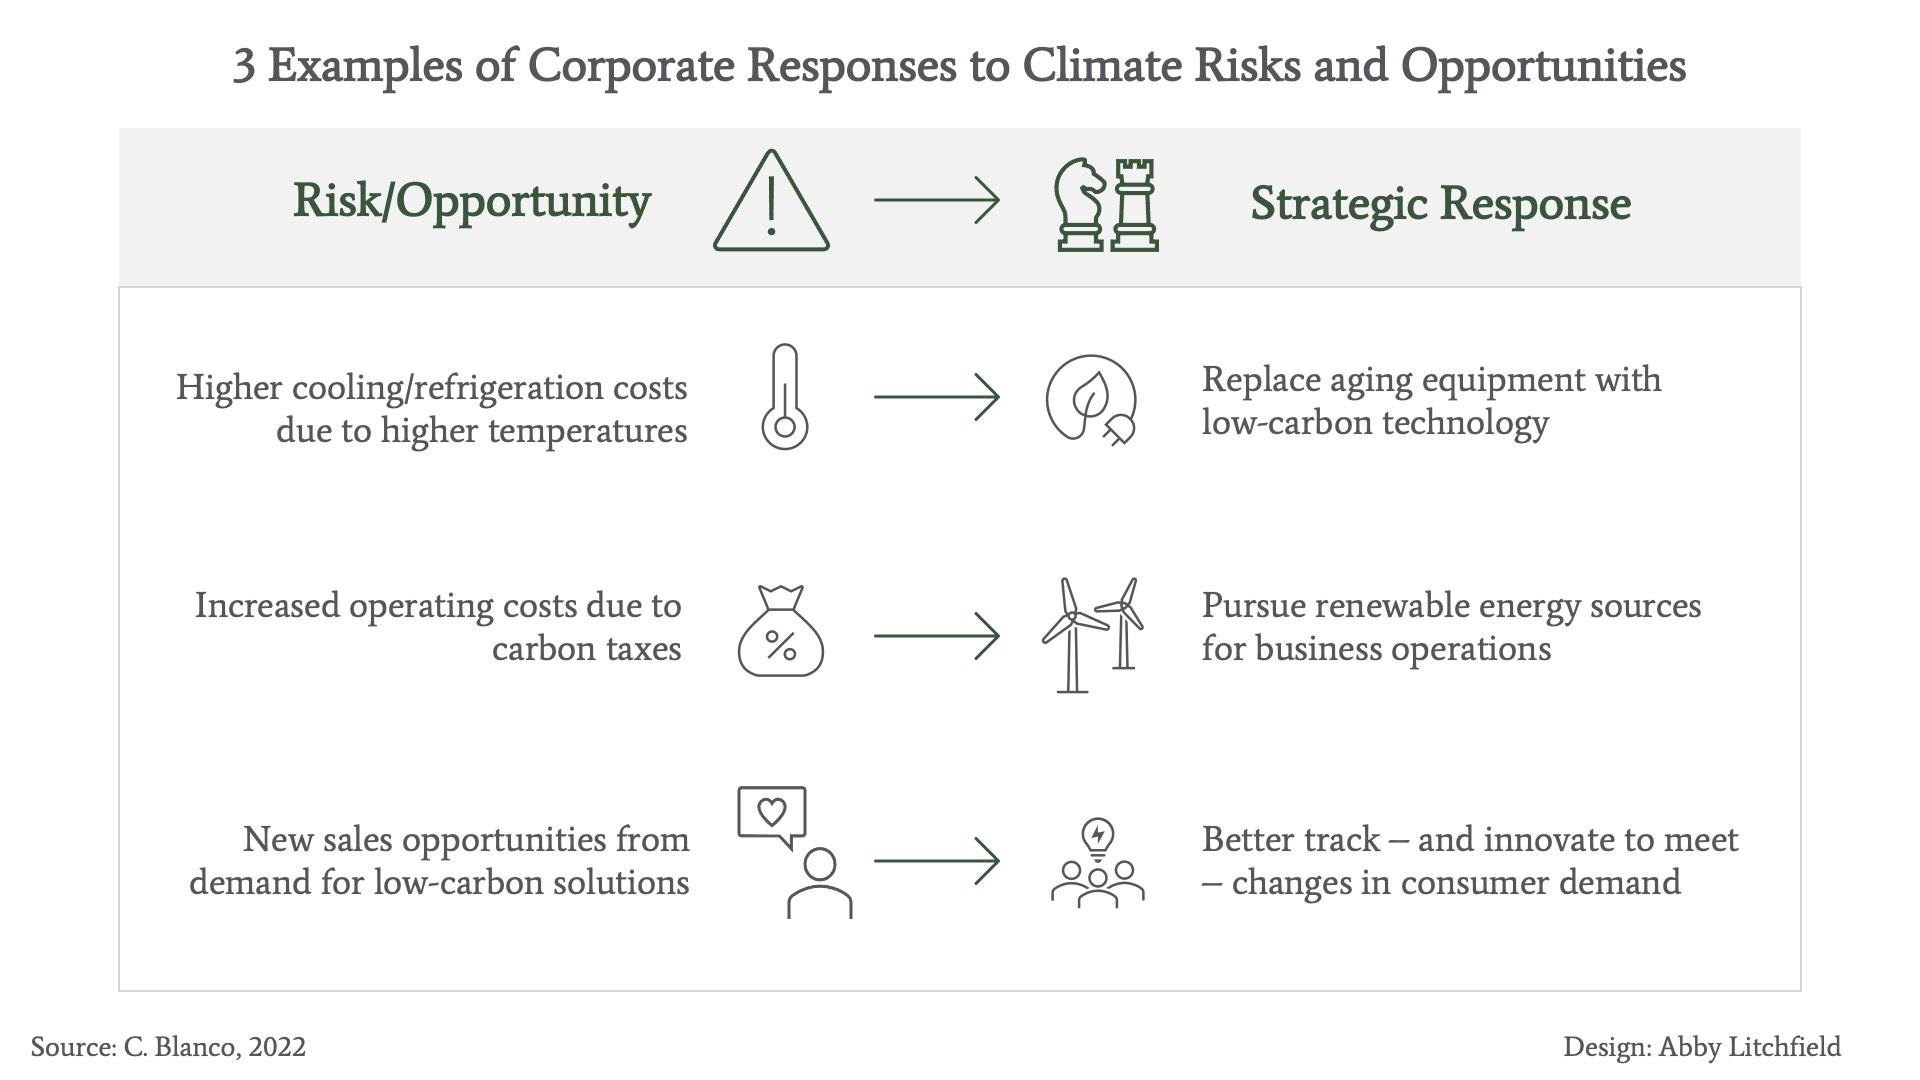 3 examples of corporate risks are: higher cooling costs due to higher temperatures and replacing aging equipment with low-carbon technology; increased operating costs due to carbon taxes to pursuing renewable energy sources for business operations; and new sales opportunities from demand for low-carbon solutions to a better track - and innovate to meet changes in consumer demand.